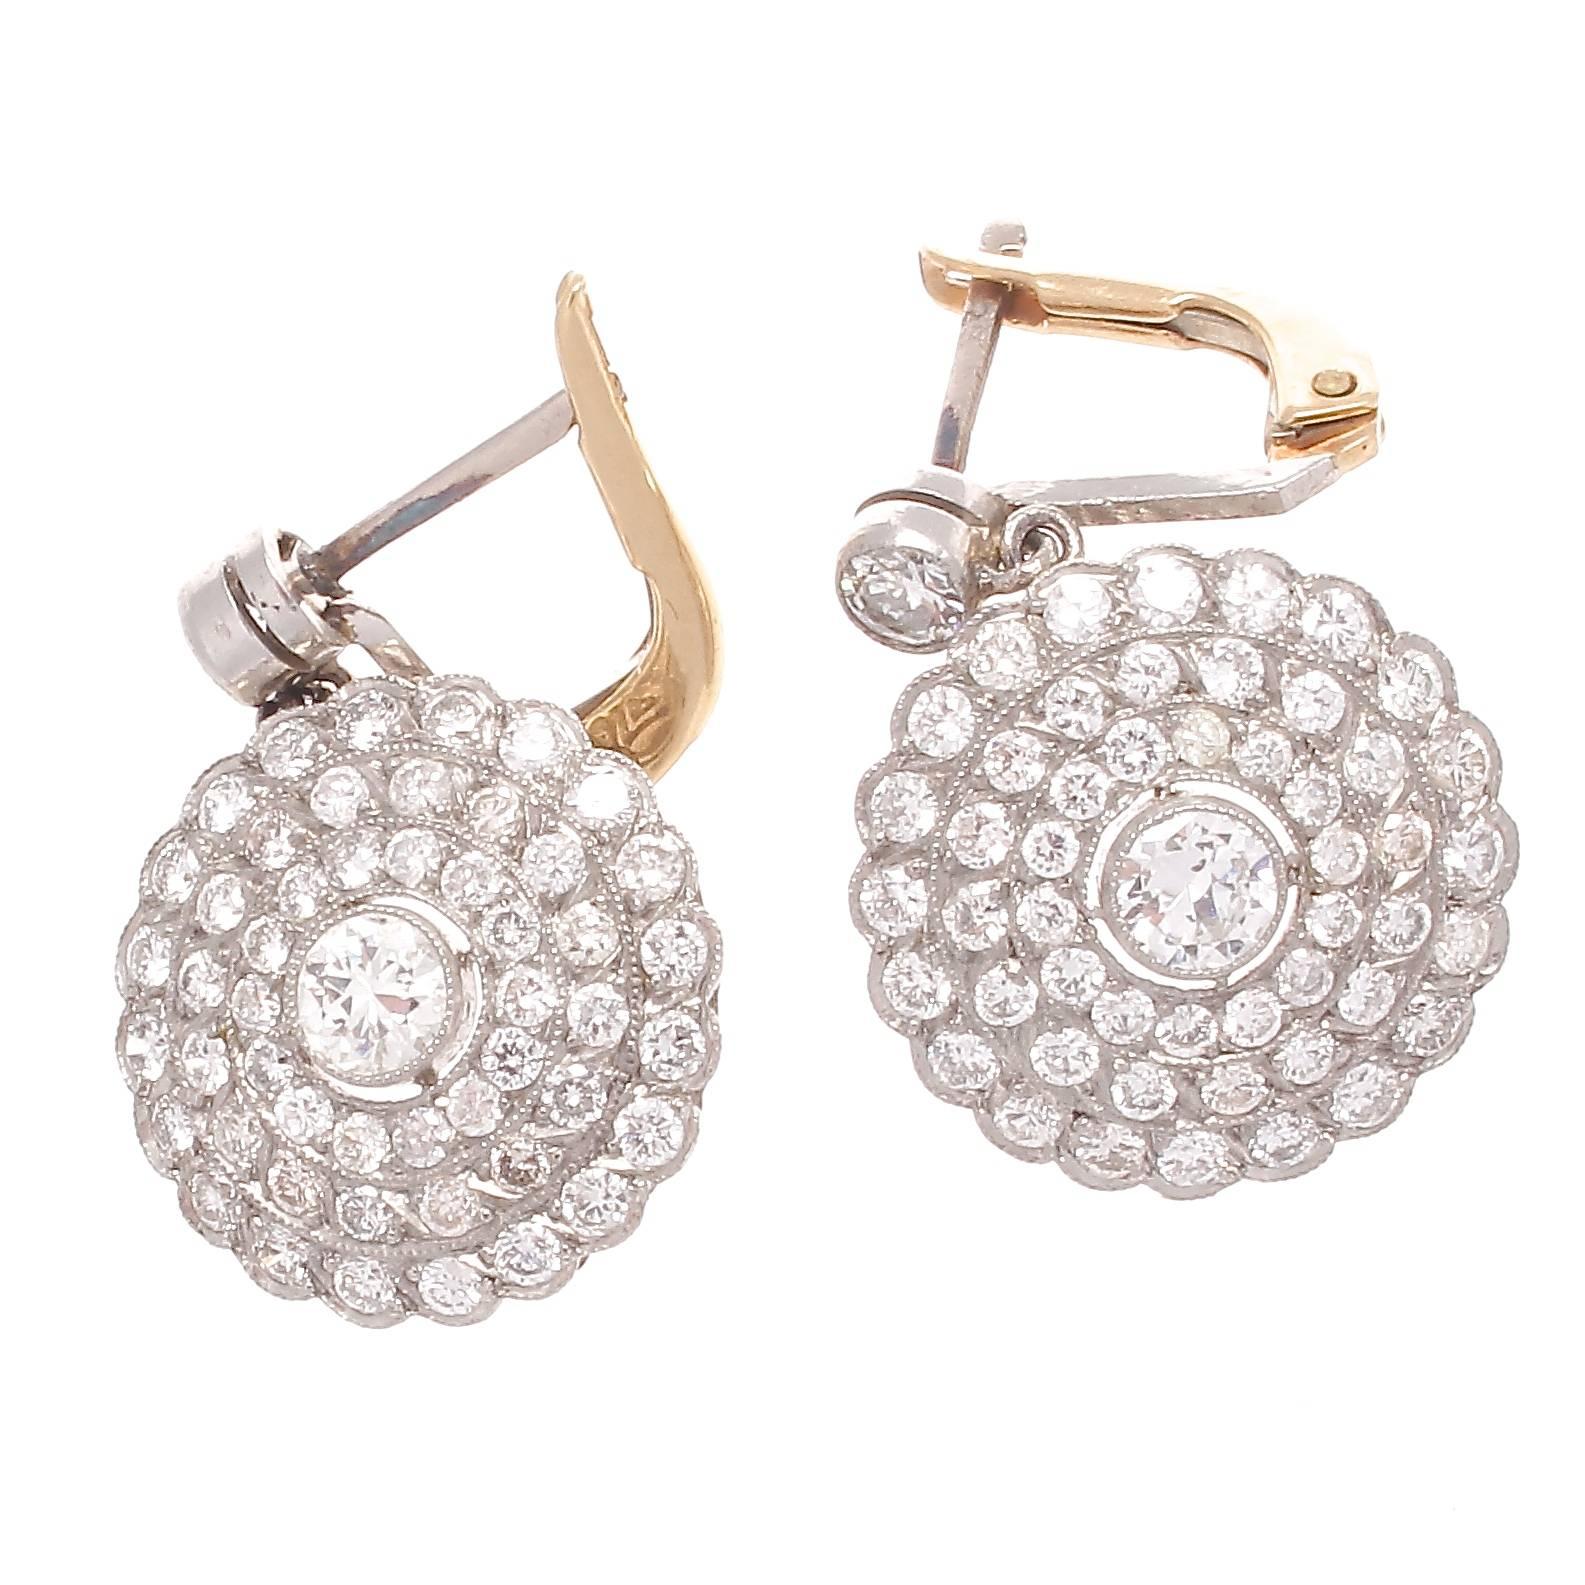 Embodying the style and allure associated with the art deco time period. Featuring numerous near colorless diamonds brilliant and sparkling making up the dangling discs. Crafted in platinum.